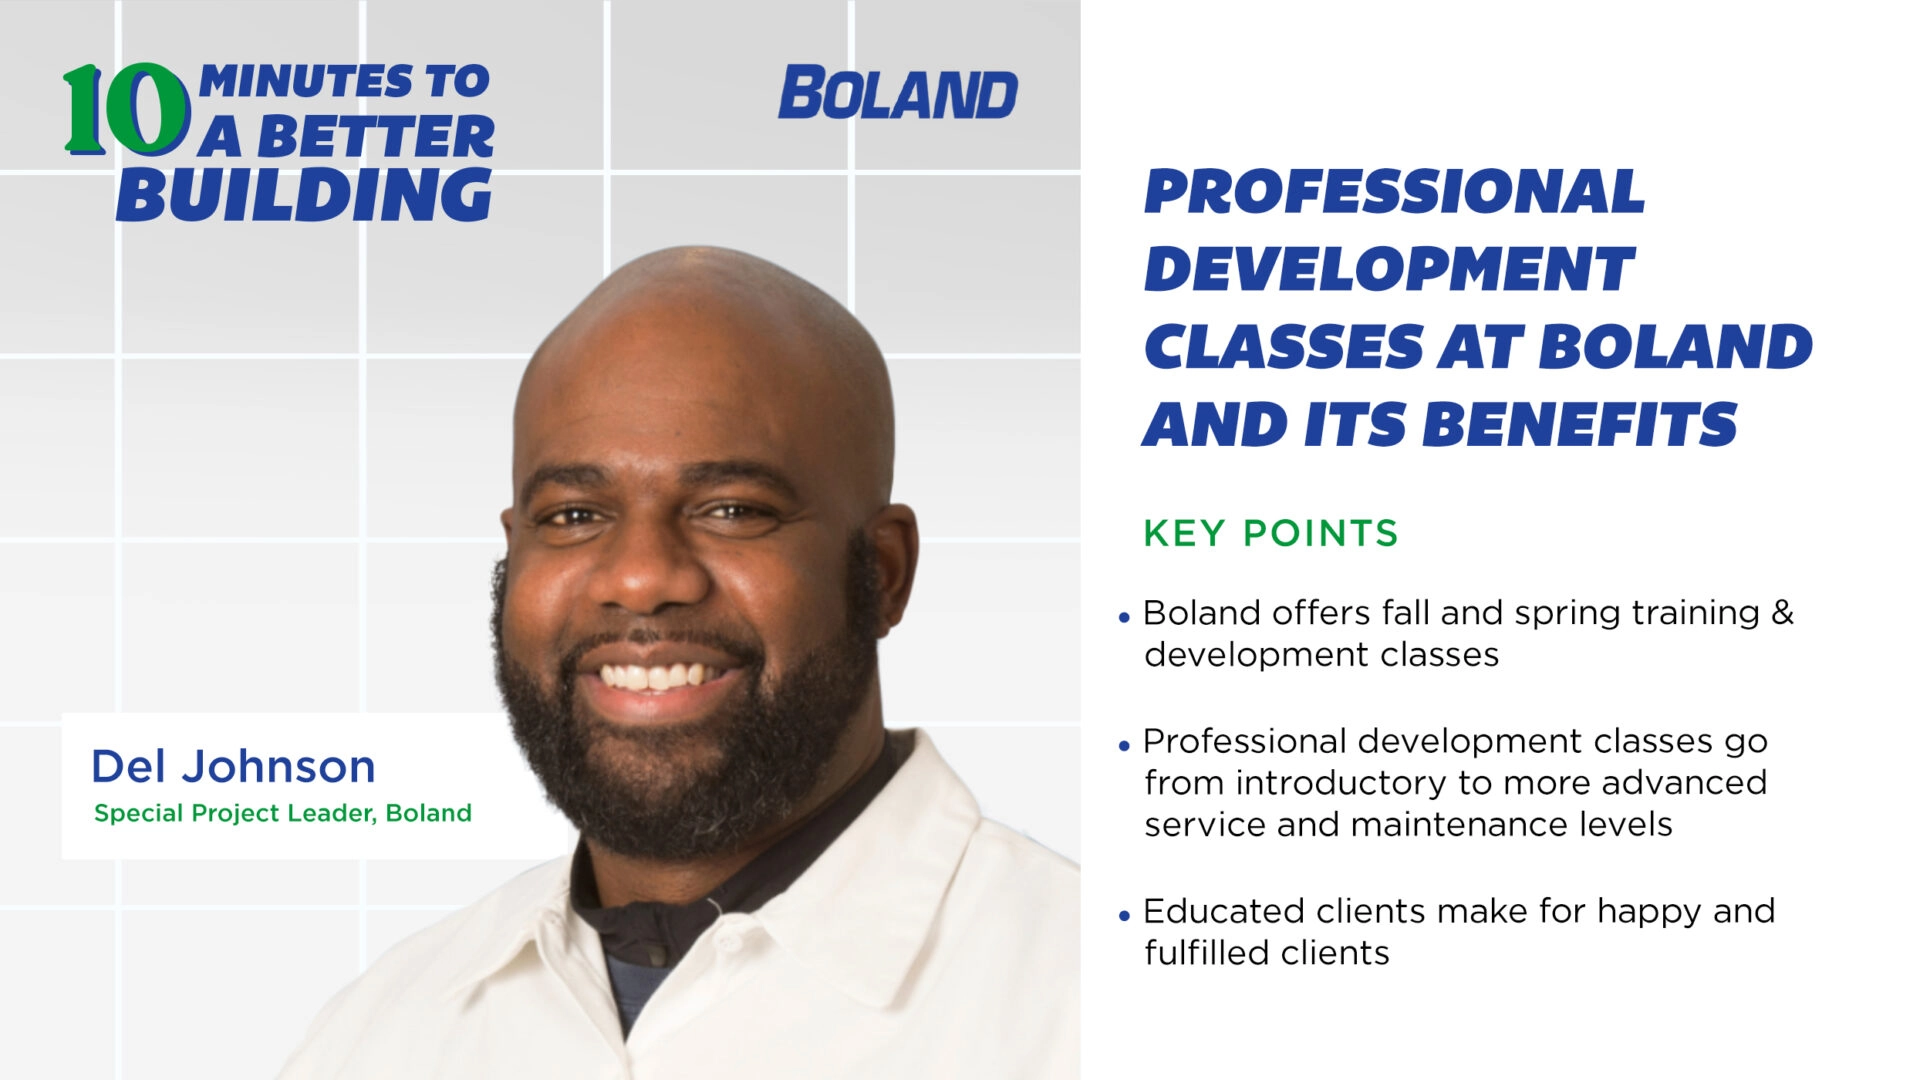 The Benefits of Boland Professional Development Courses